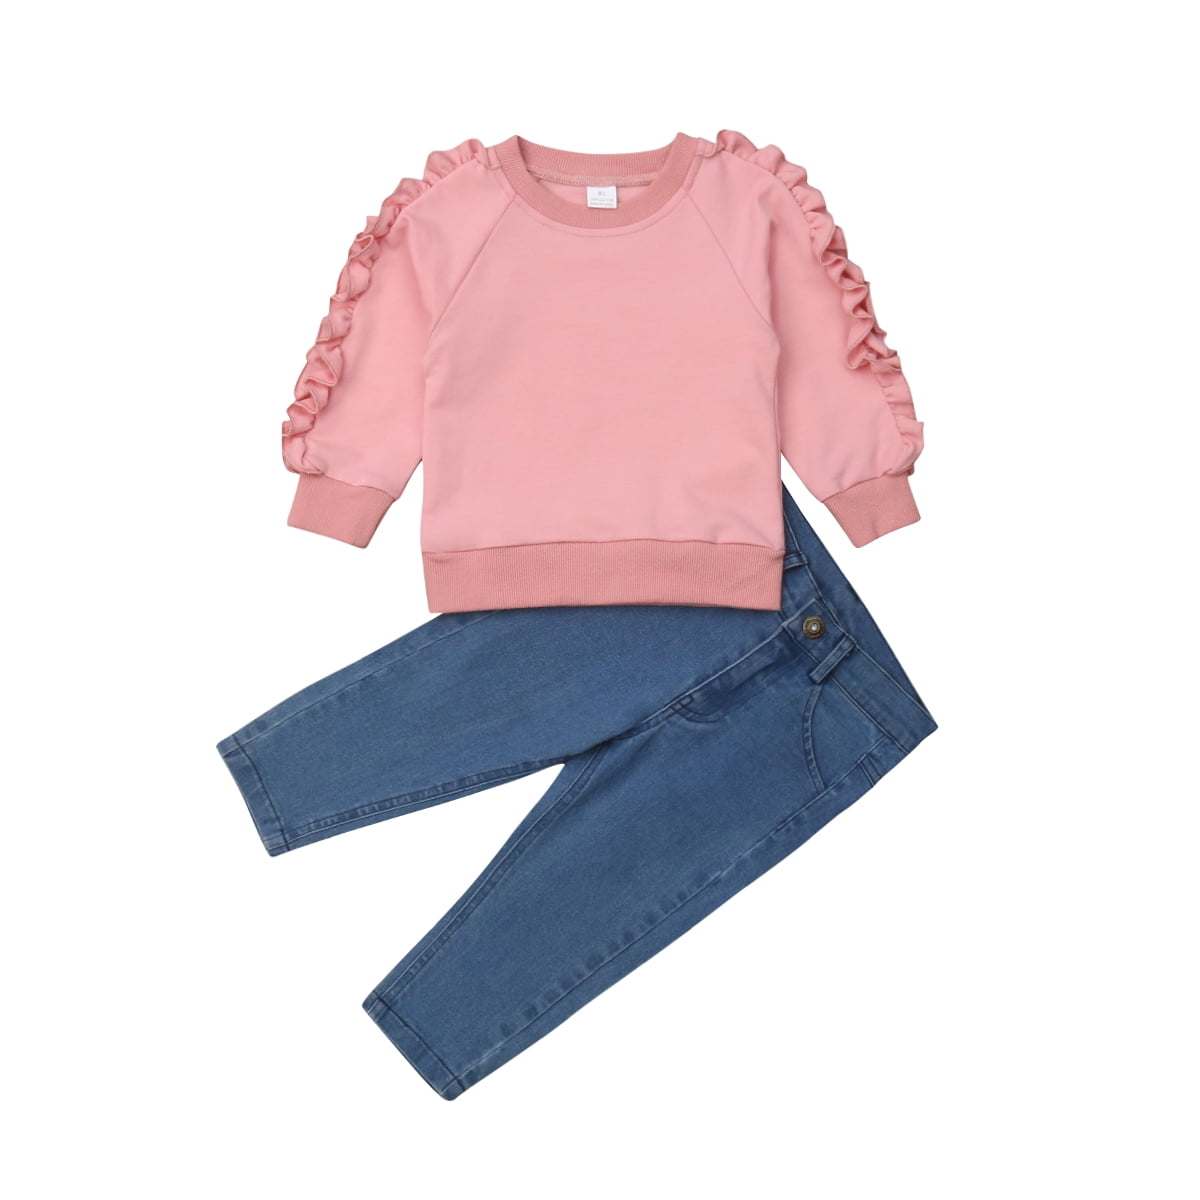 Kids Toddler Baby Girl Top T-shirt+Long Jeans Denim Pants 2PCS Outfits Clothes T 